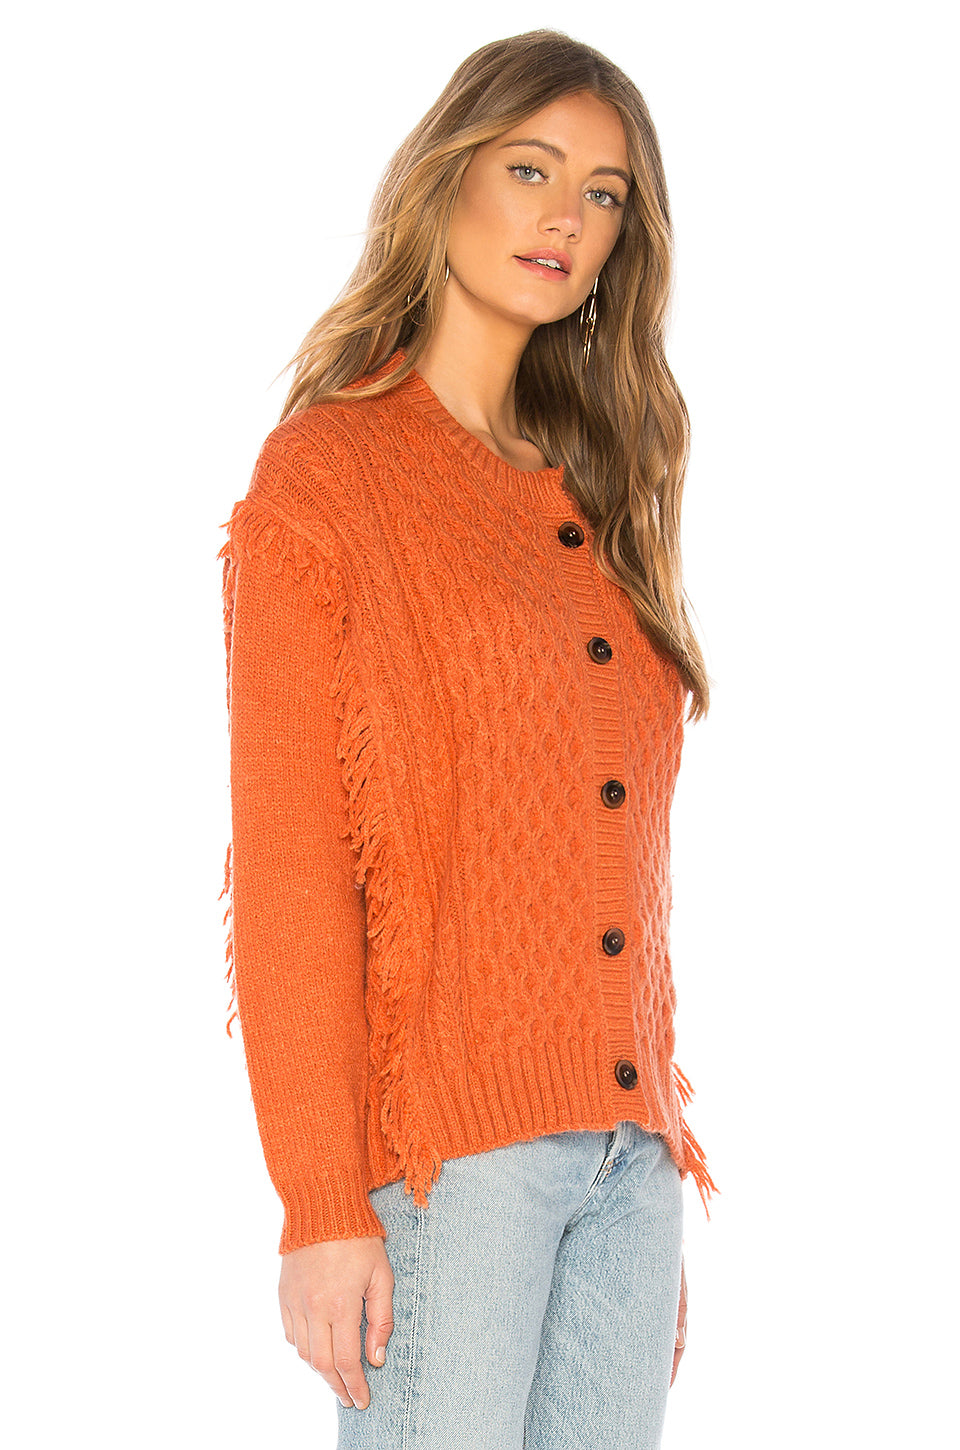 Chester Sweater Jacket in CORAL